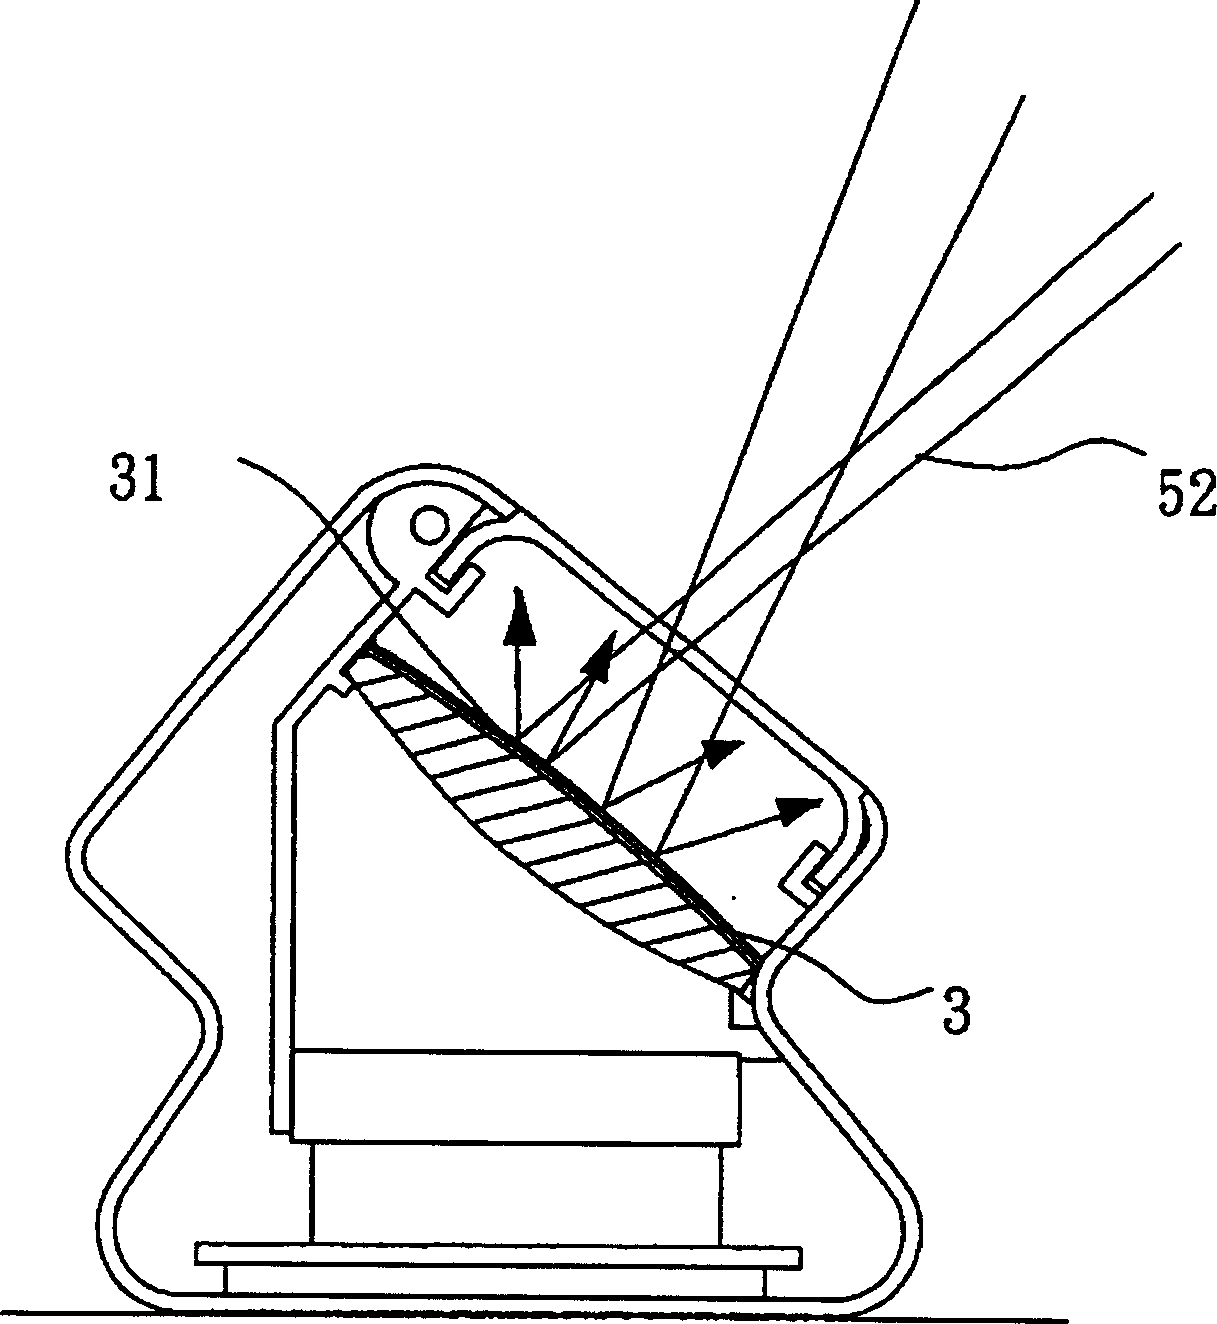 Refractive projecting unit possessing light filter